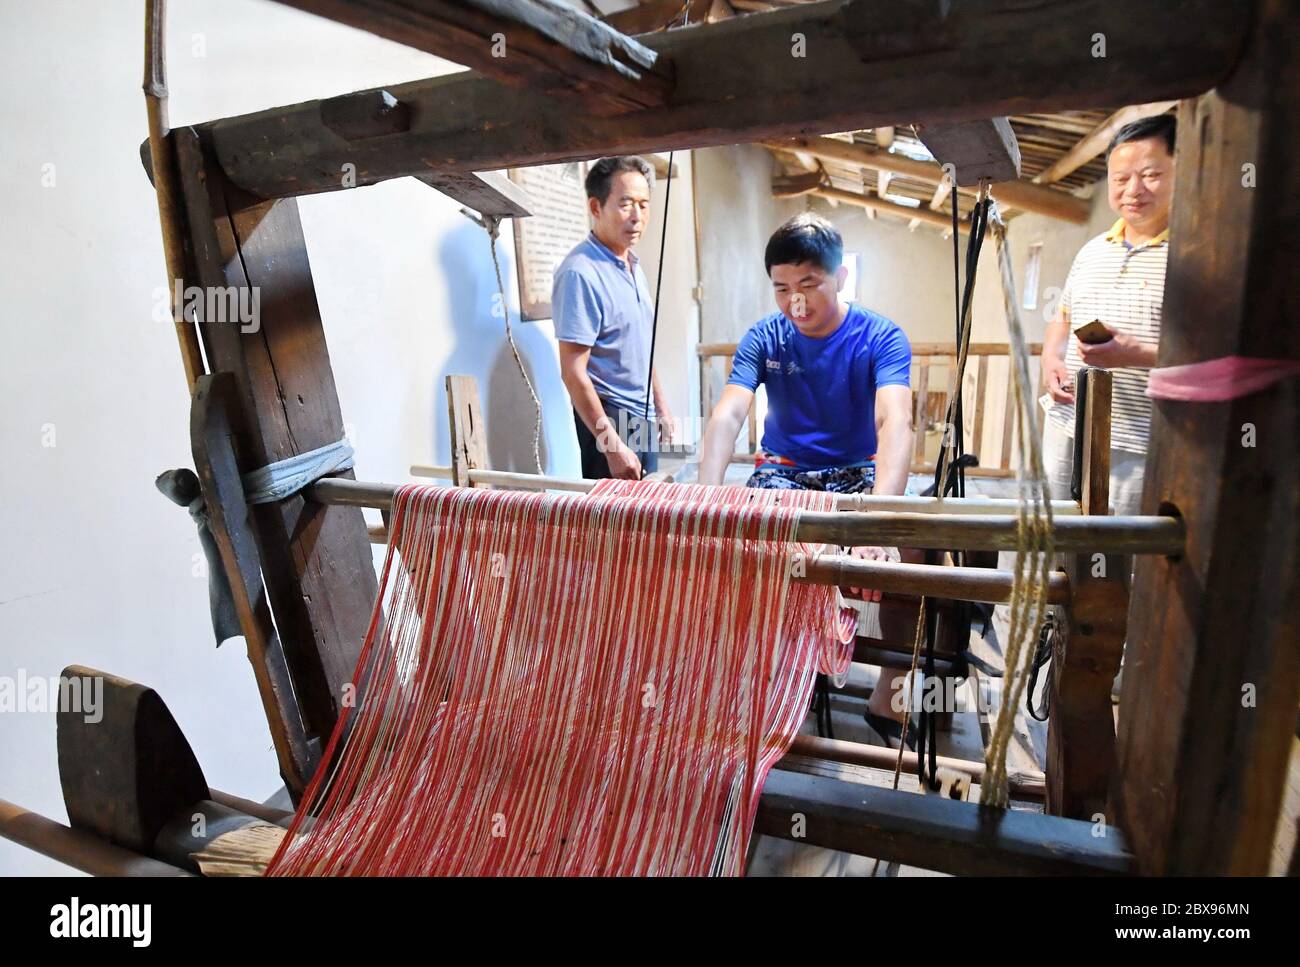 Yongchun Fujian 6th June A Tourist Experiences A Traditional Loom At A Museum In Waibi